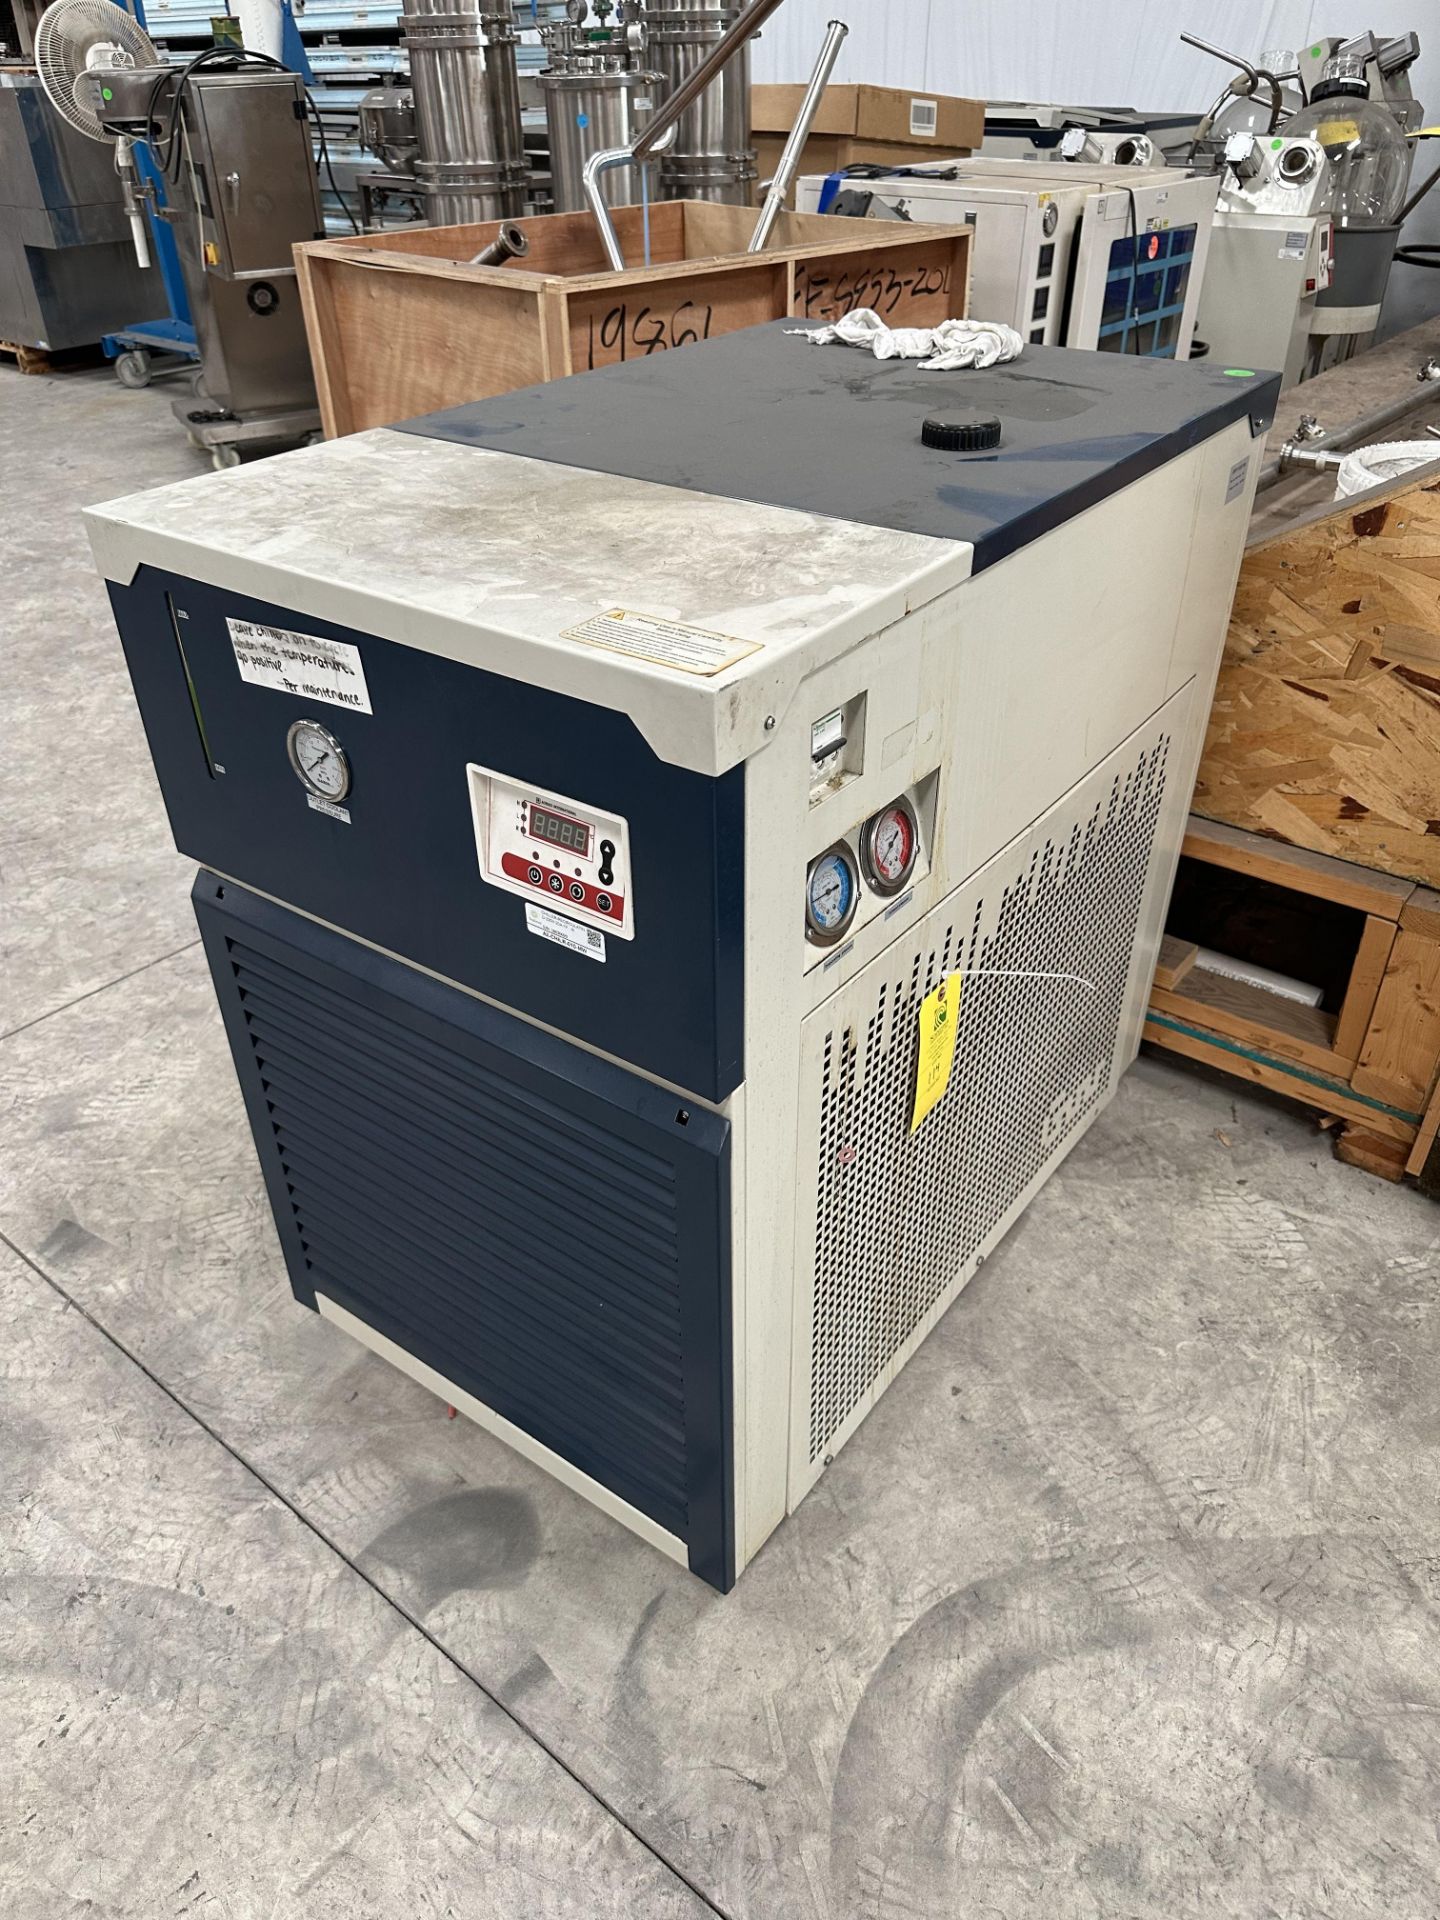 (Located in Quincy, FL) Across International Recyclable Chiller, Model# C30-40-50L, Serial#